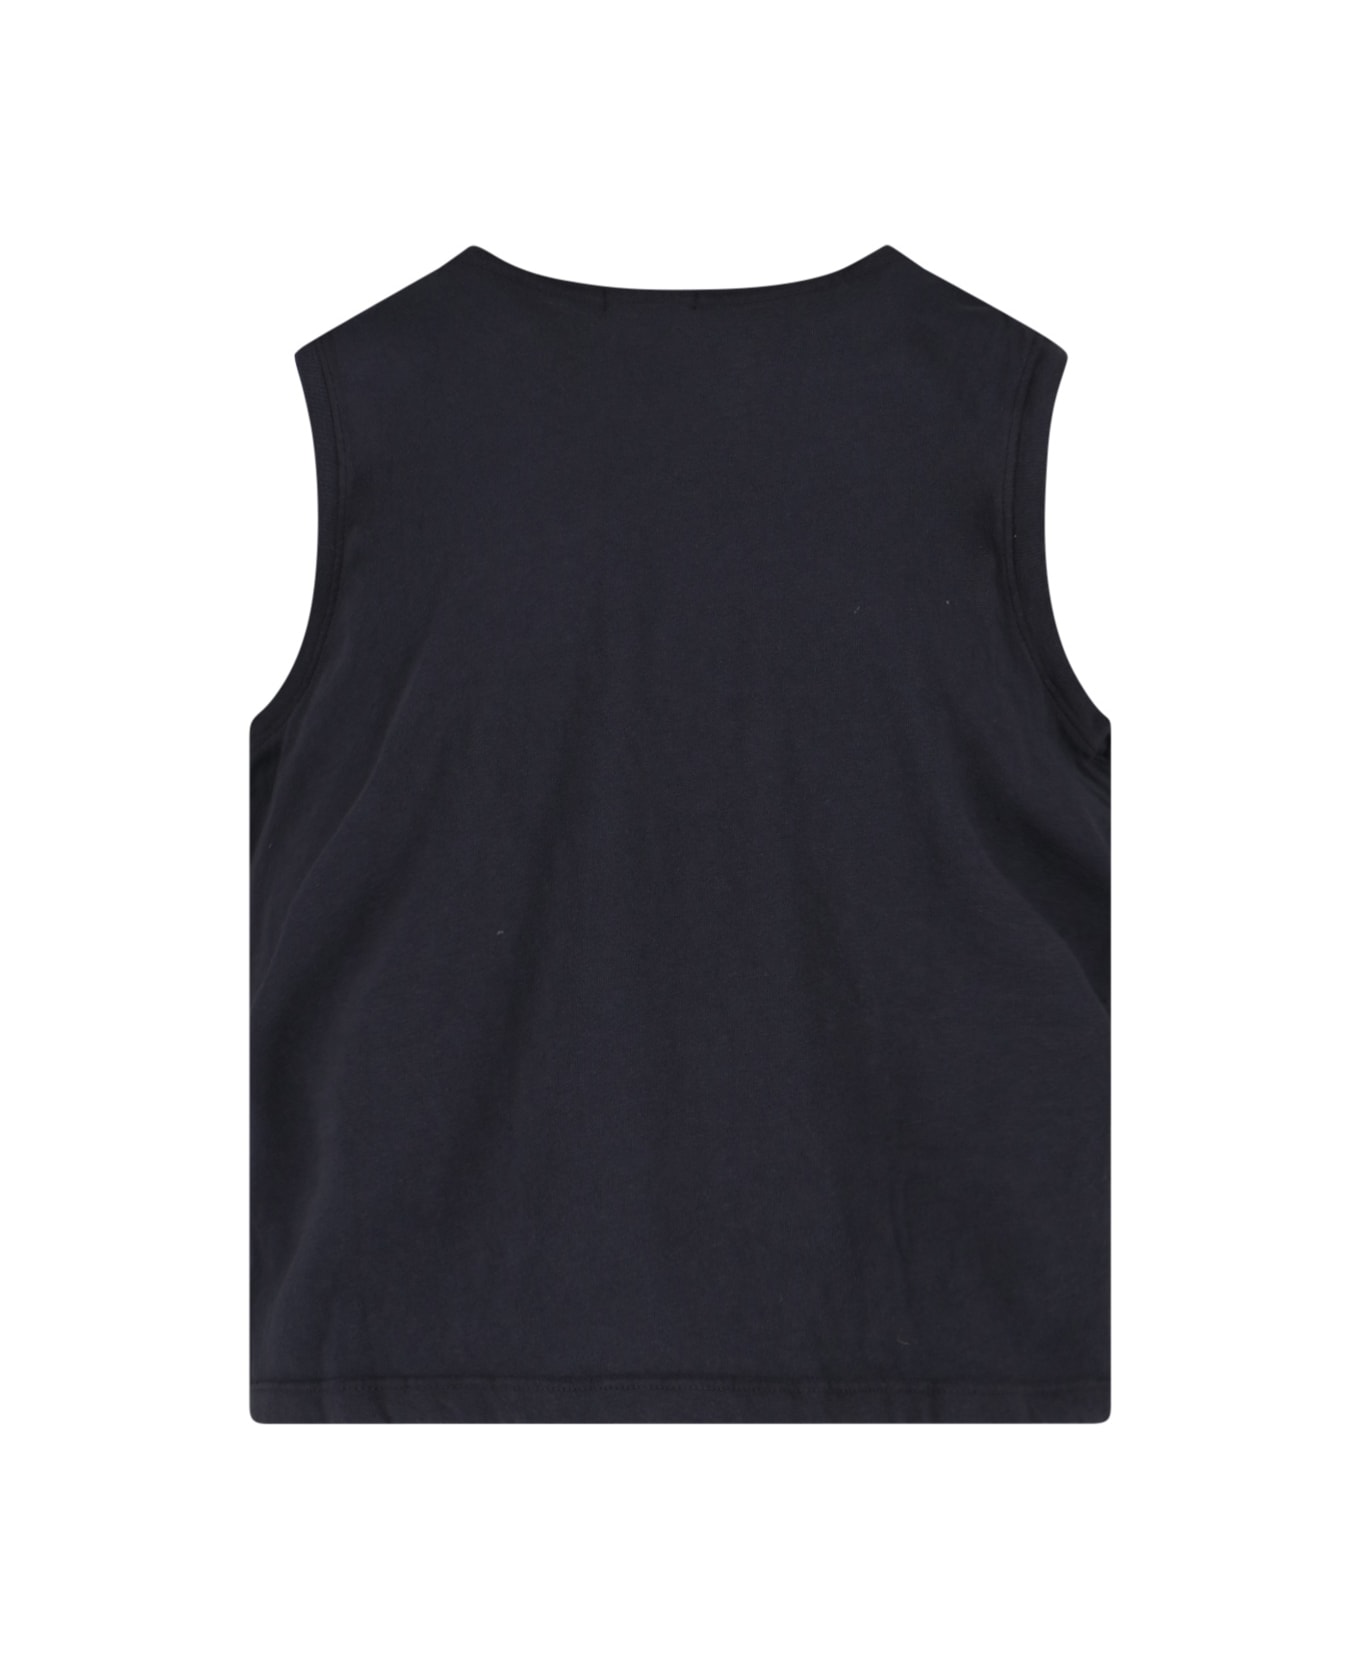 Mother Top Tank "the Strong And Silent Type" - Black  